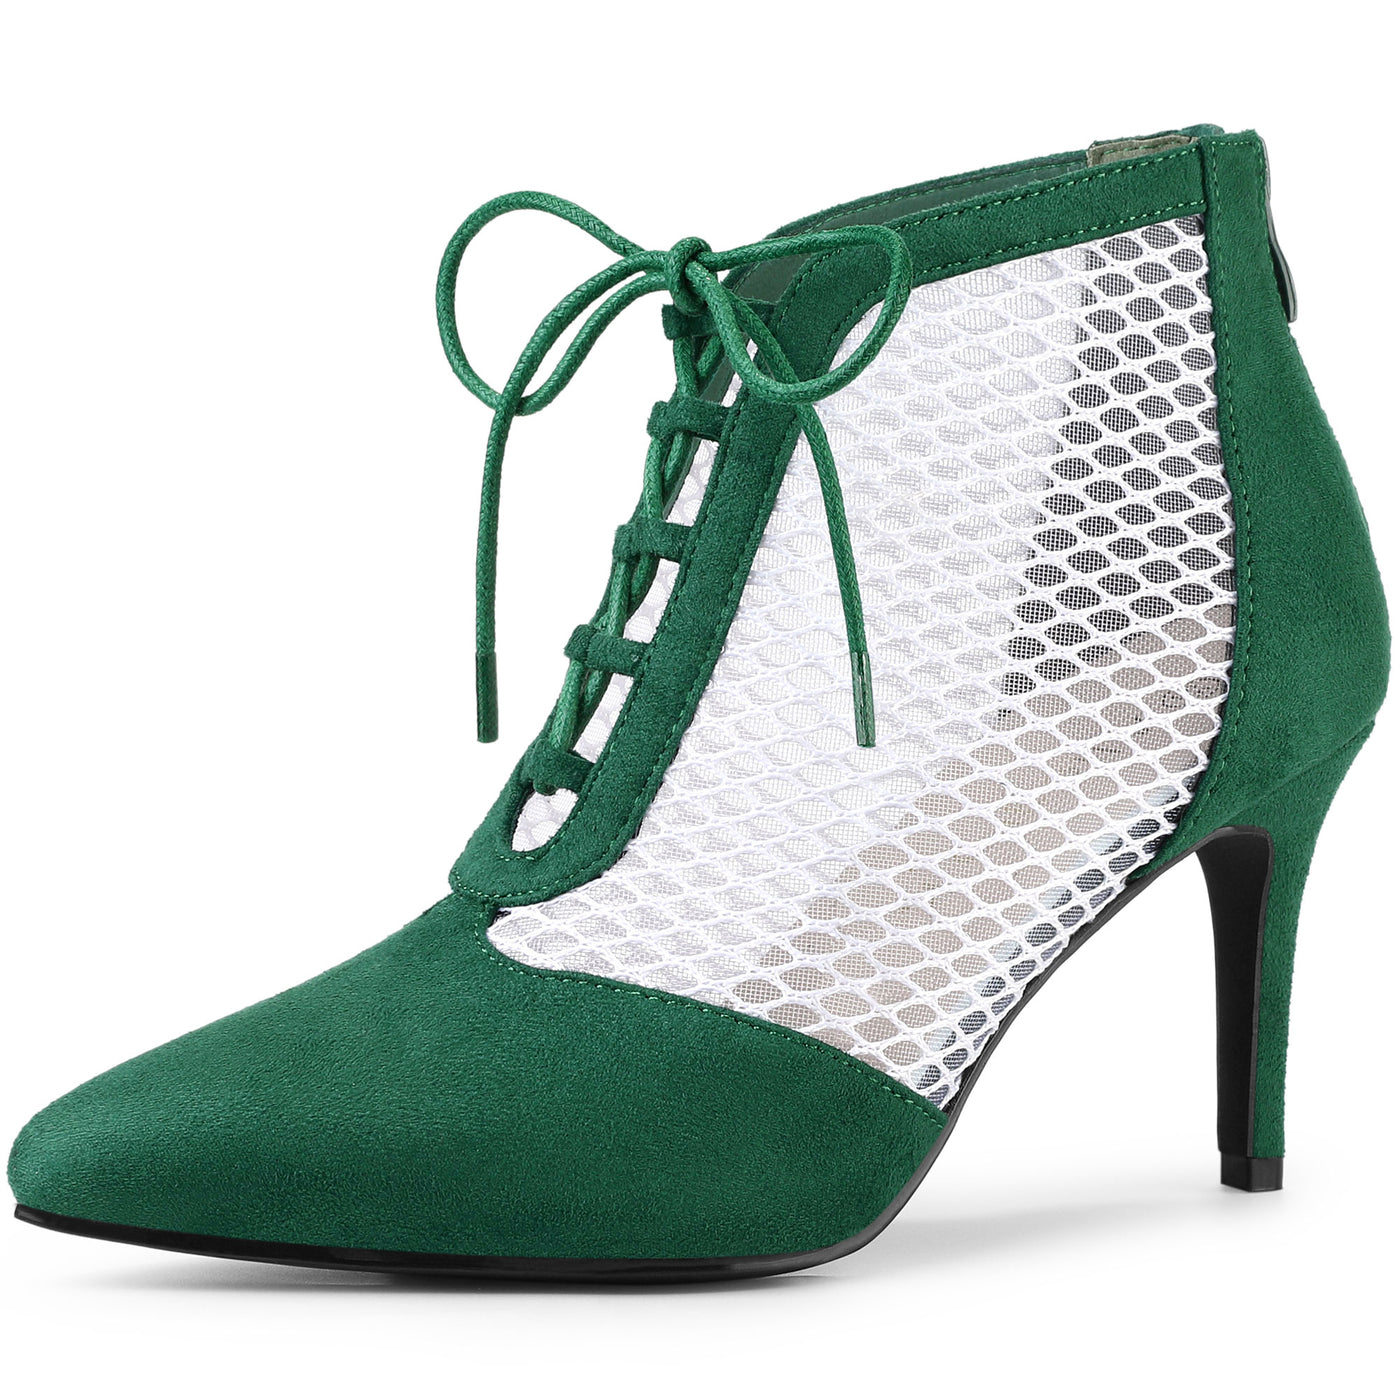 Allegra K Mesh Lace Up Stiletto Heel Ankle Boots